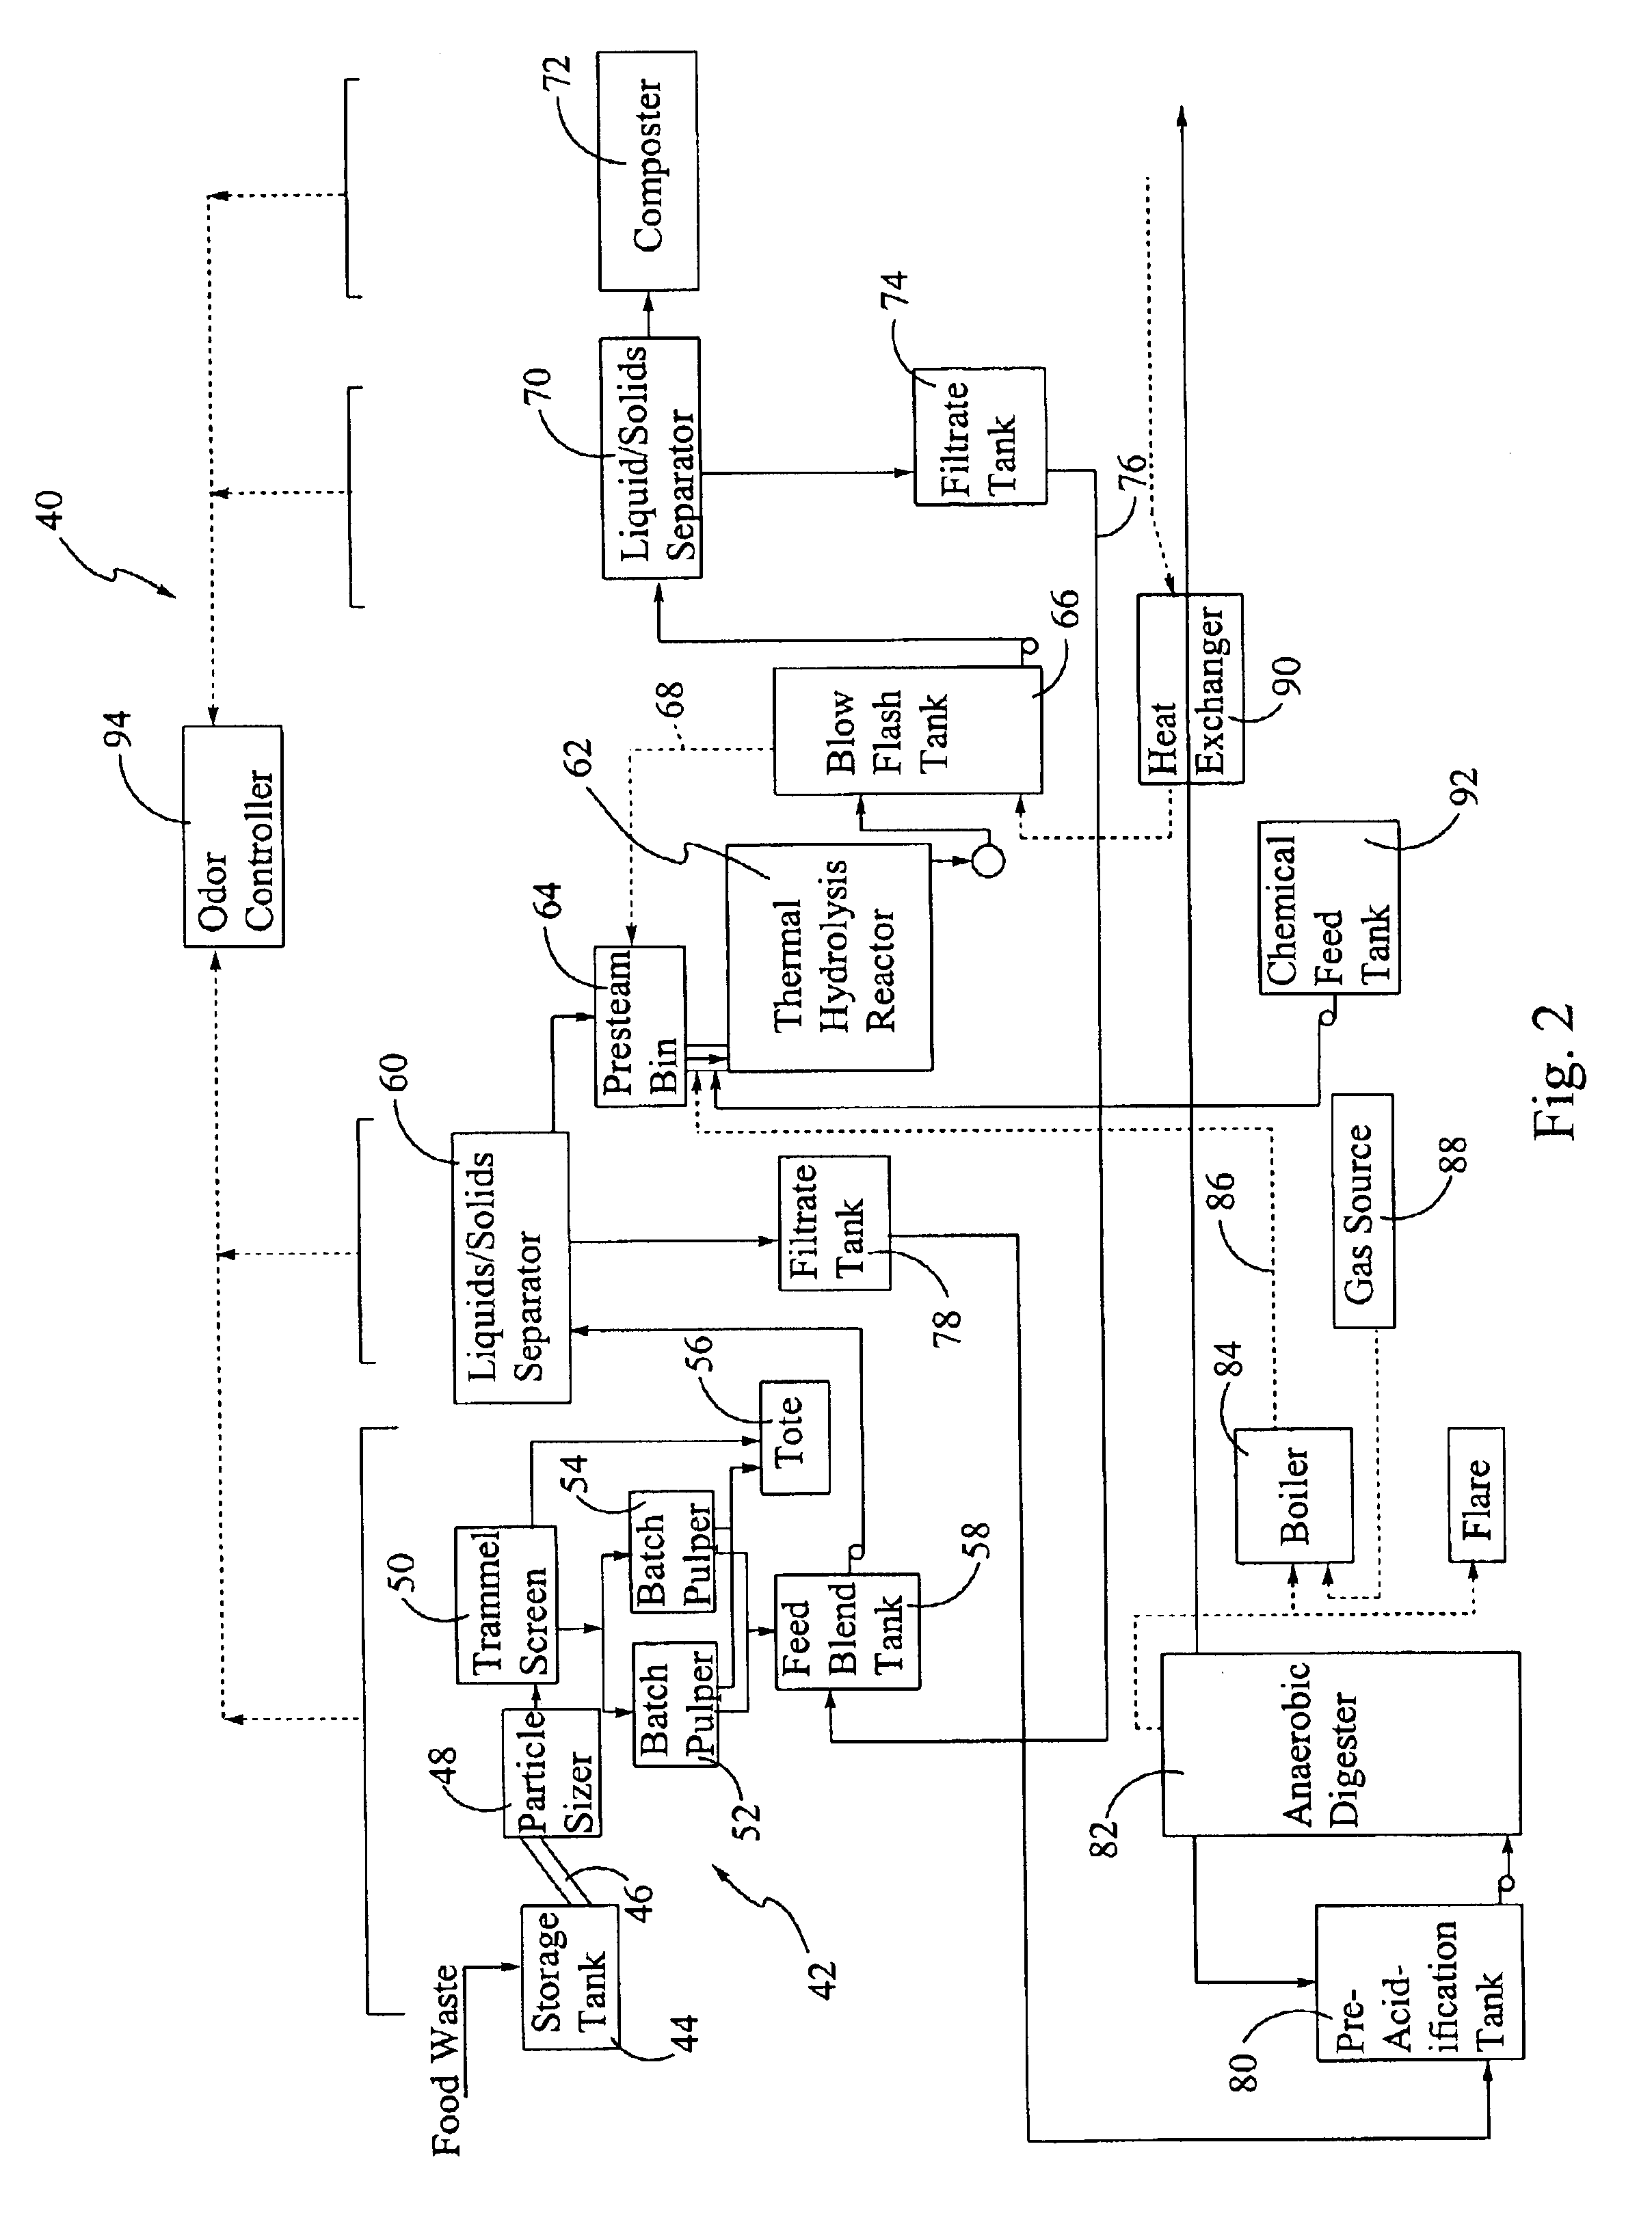 Method and apparatus for the treatment of particulate biodegradable organic waste